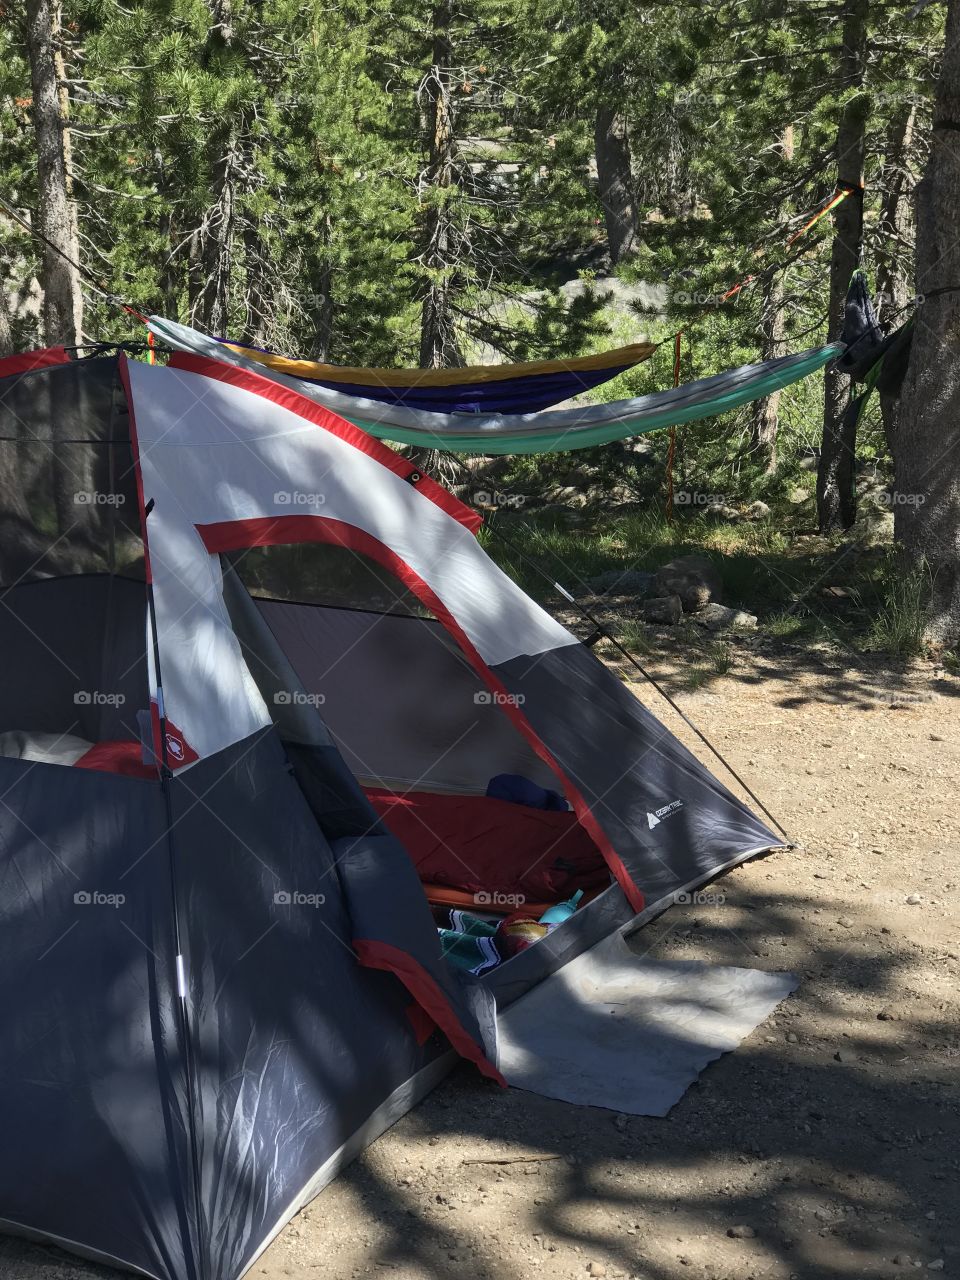 The perfect set up to a perfect day of camping. A tent ready and waiting for its inhabitants and hammocks aligned for relaxation in the meantime. 